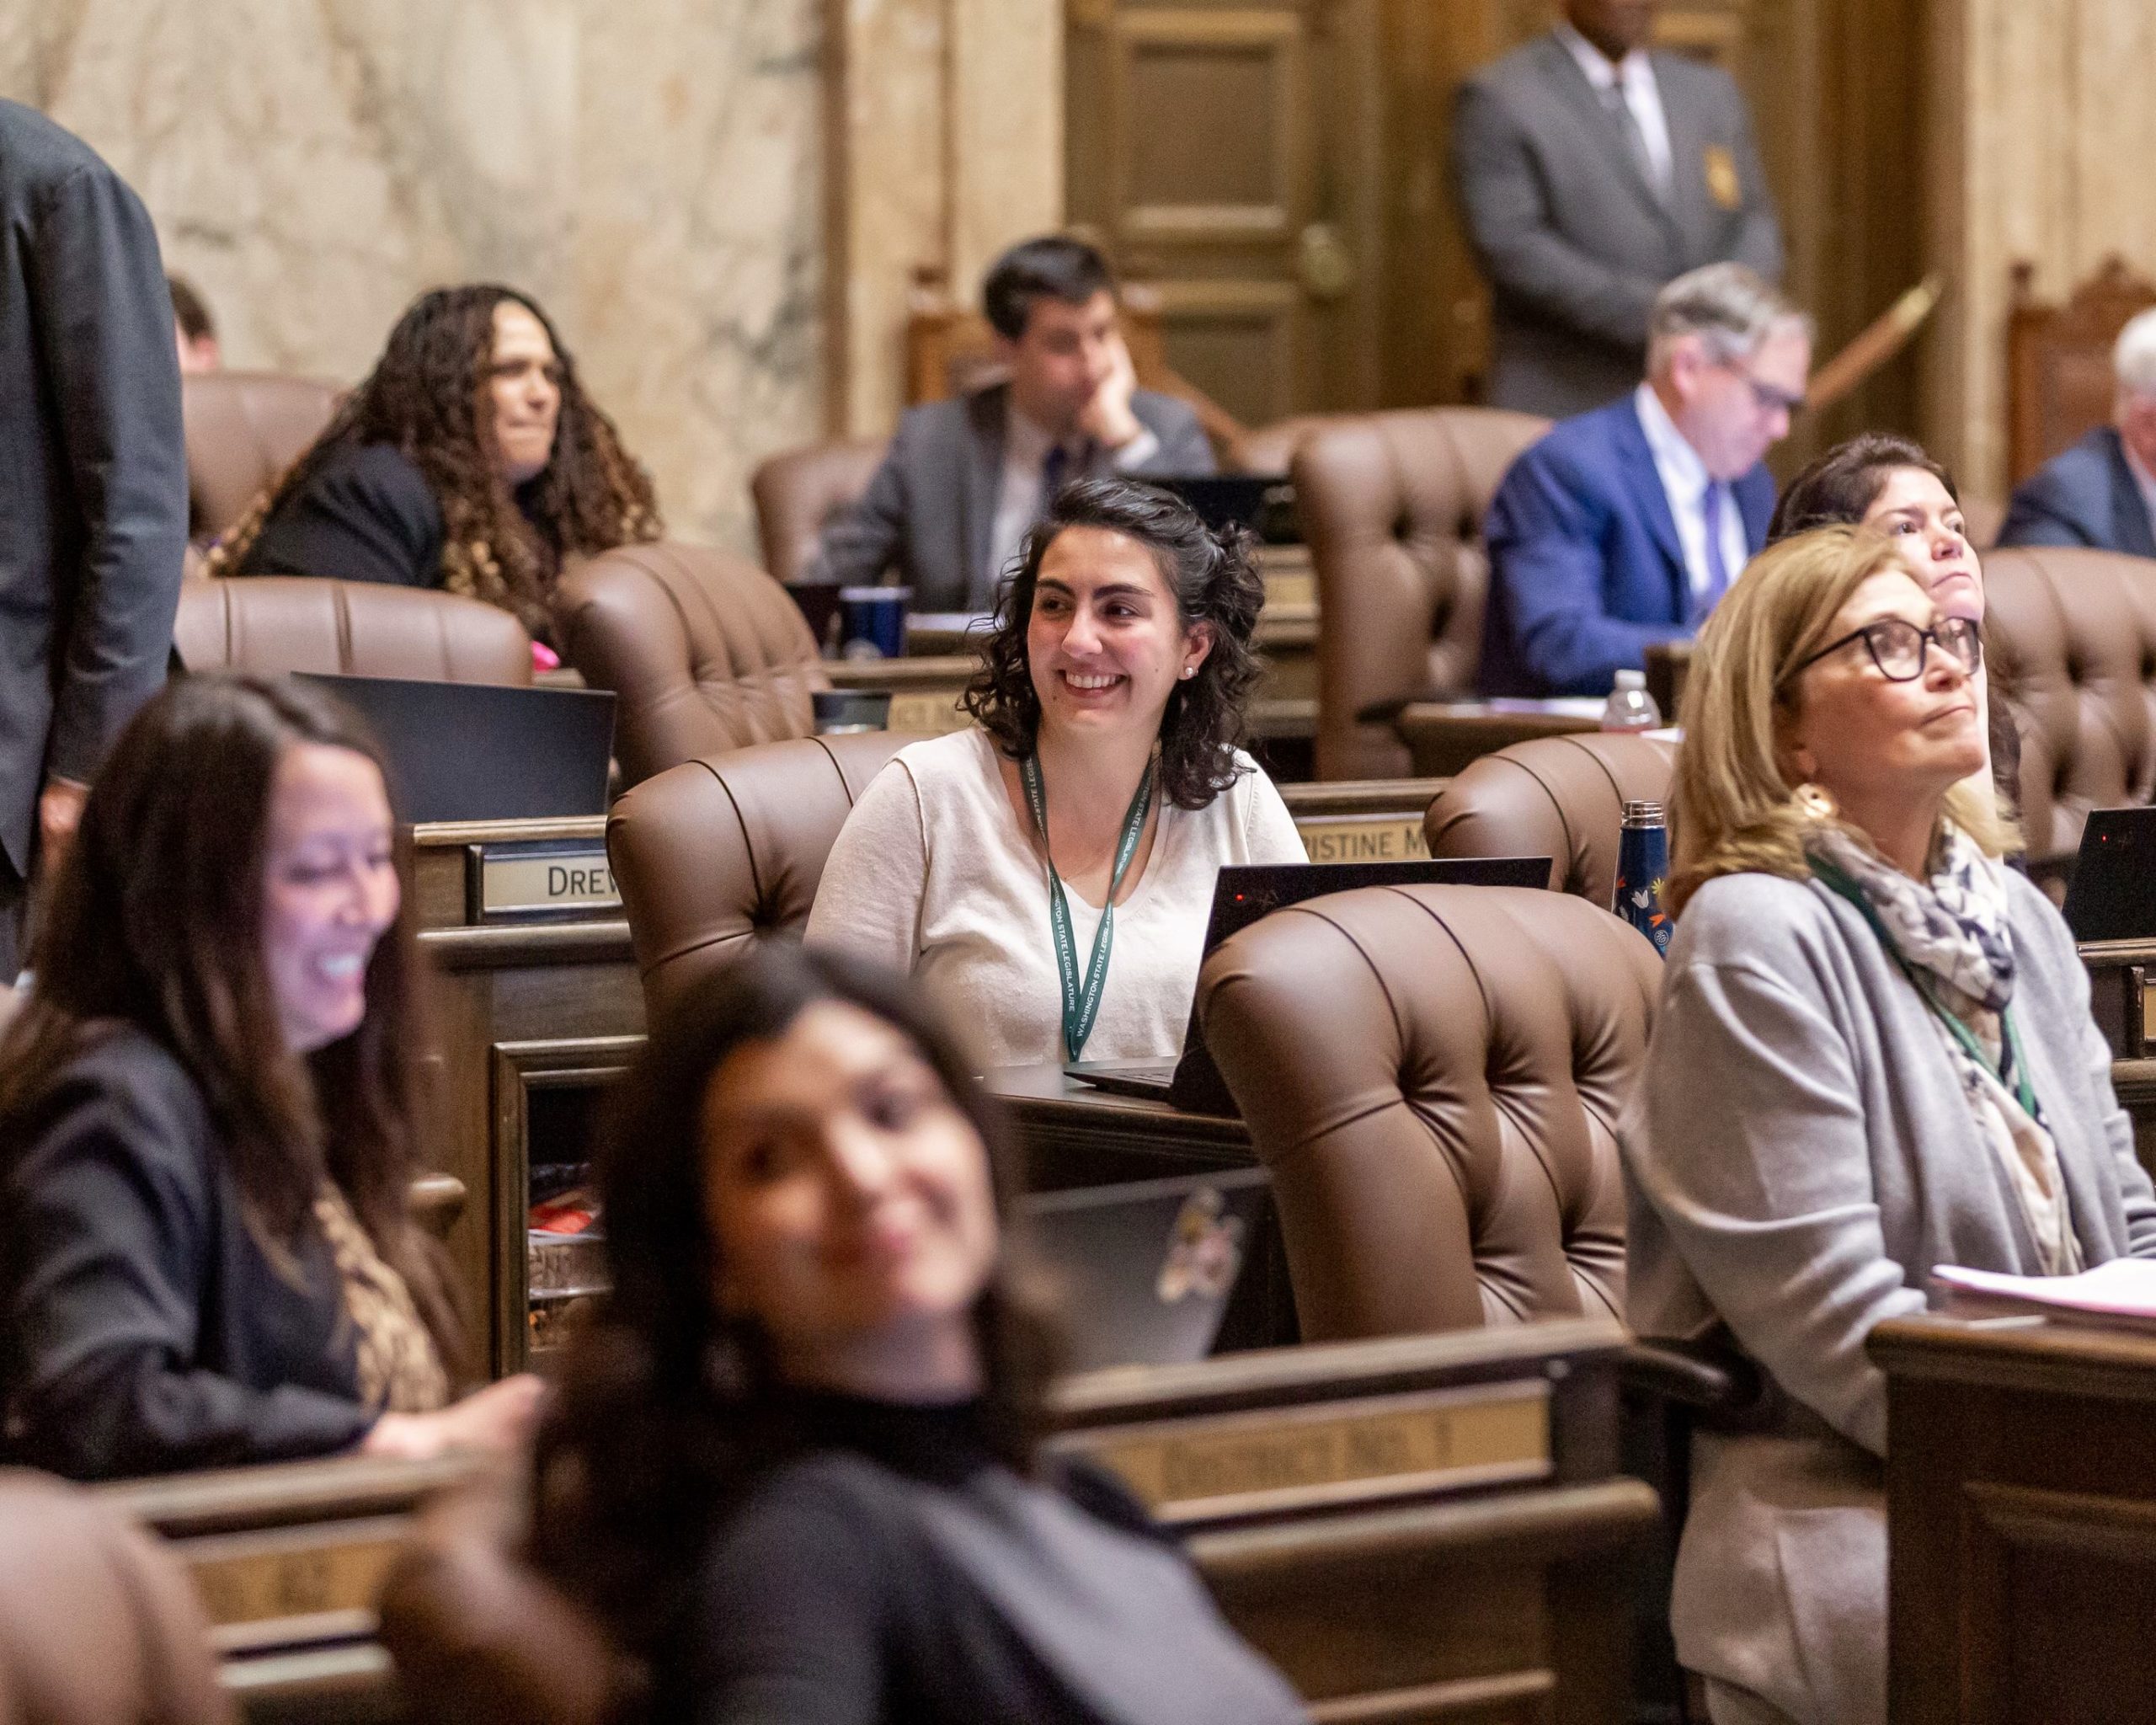 Rep. Farivar sitting at her desk among her colleagues on the House floor. She is looking to her right and smiling with her colleagues. The background of the image is blurred while she is in focus.